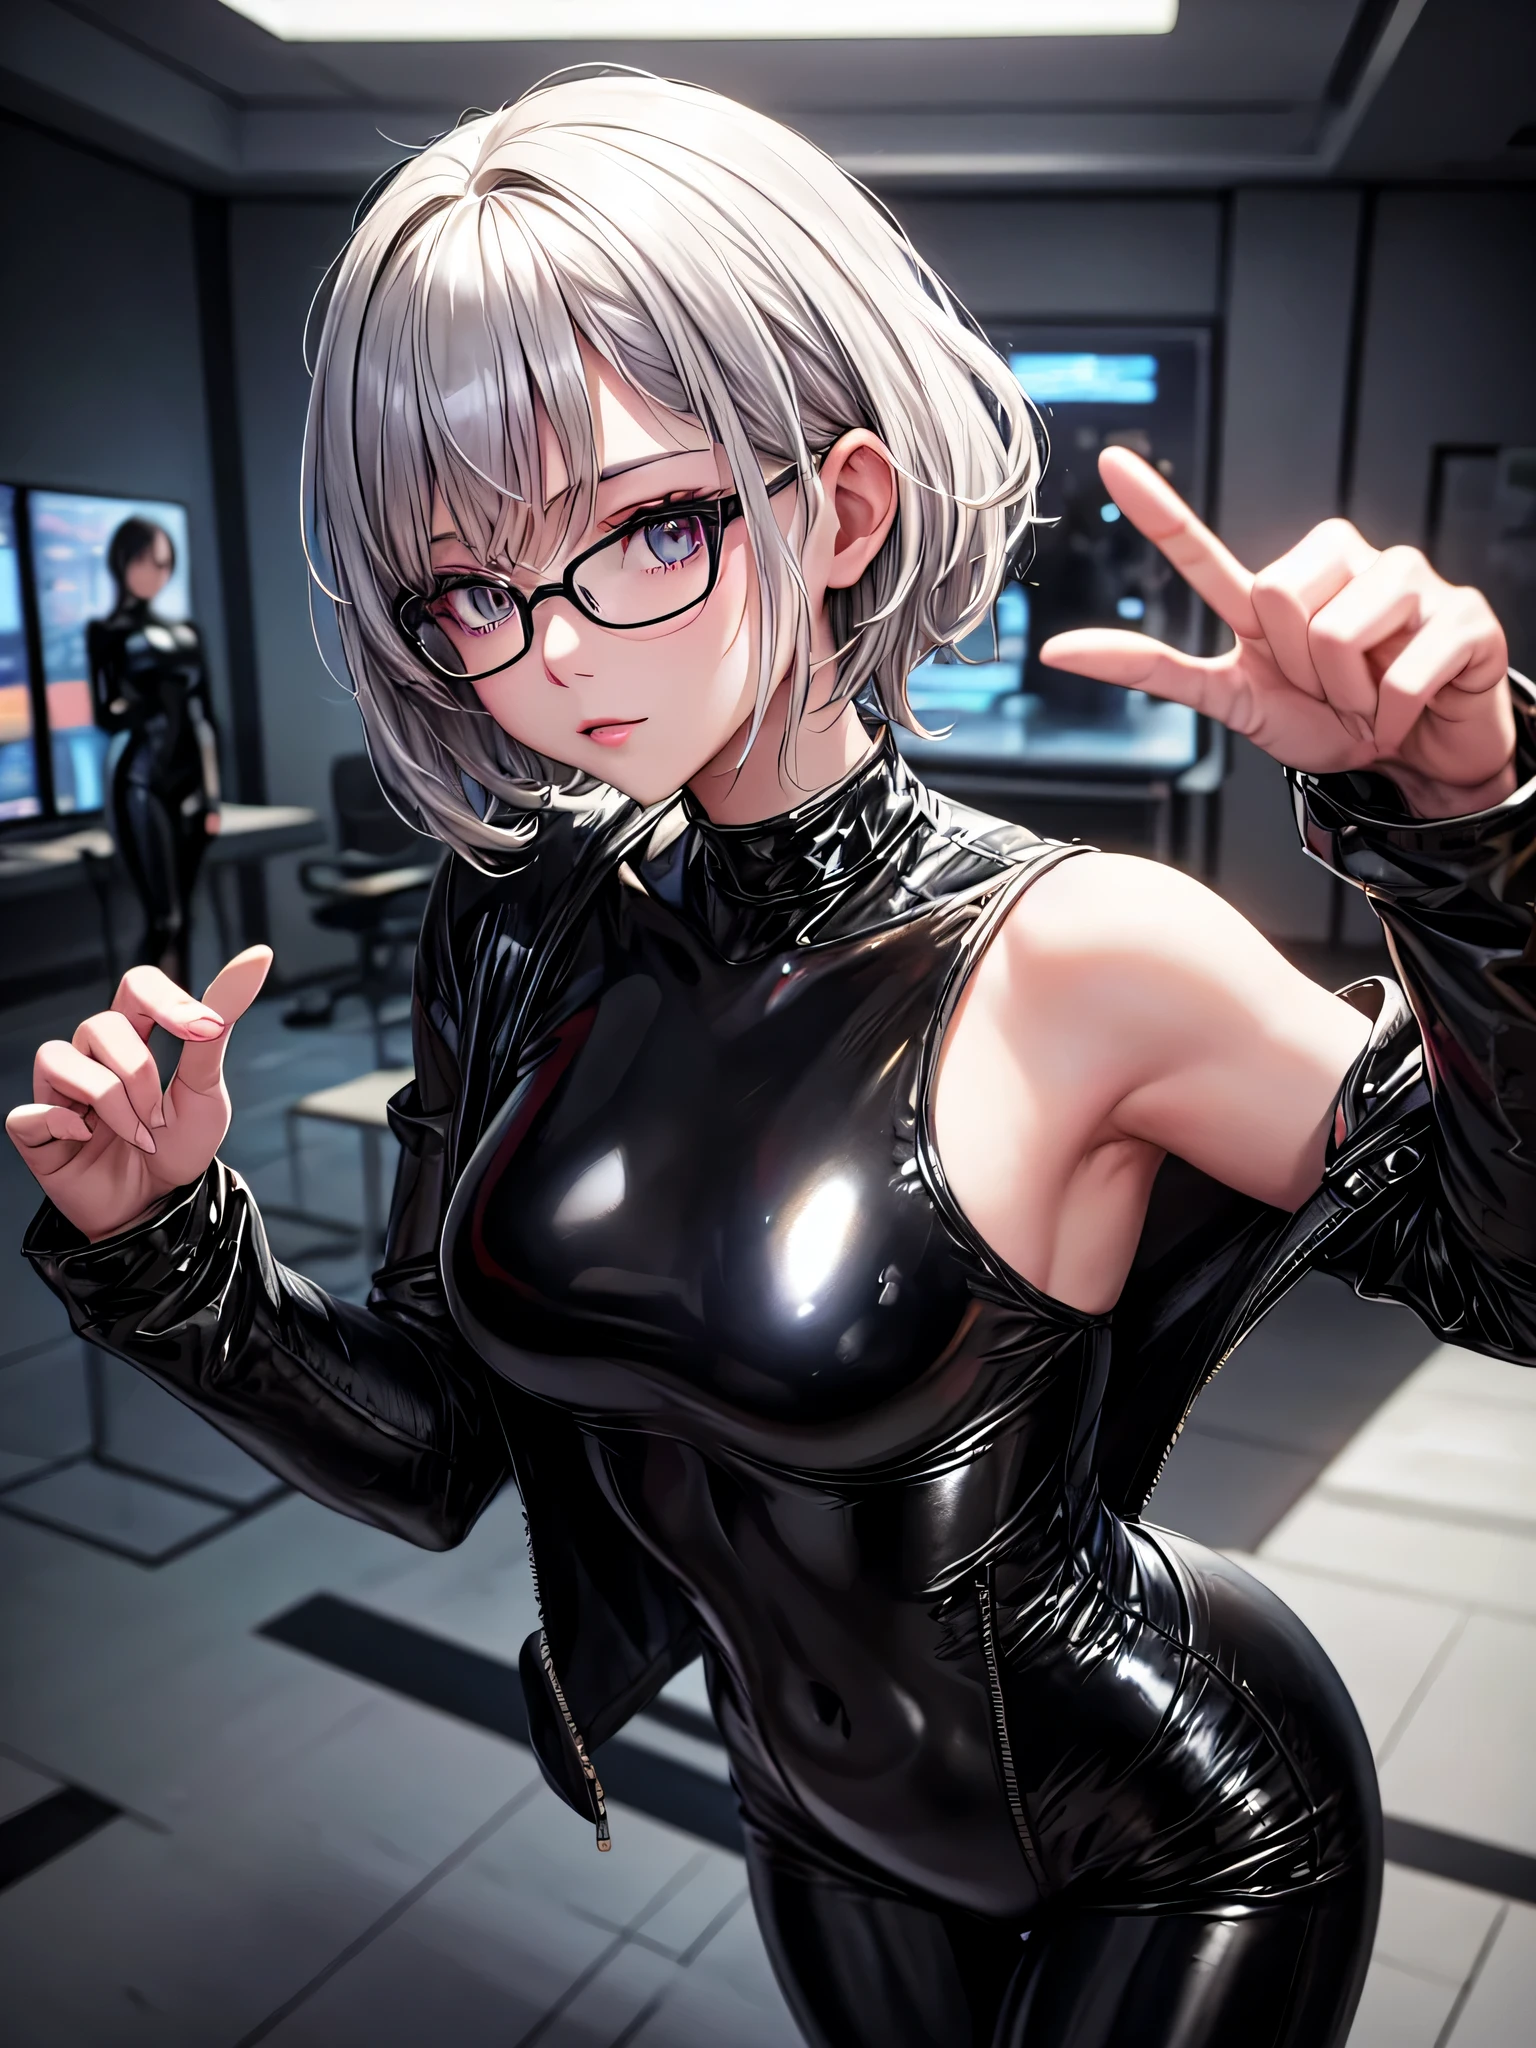 Top quality 8K UHD、Beautiful silver-haired woman with short hair wearing glasses and a black metallic latex sweatsuit、black metallic latex sweatsuit with hidden skin